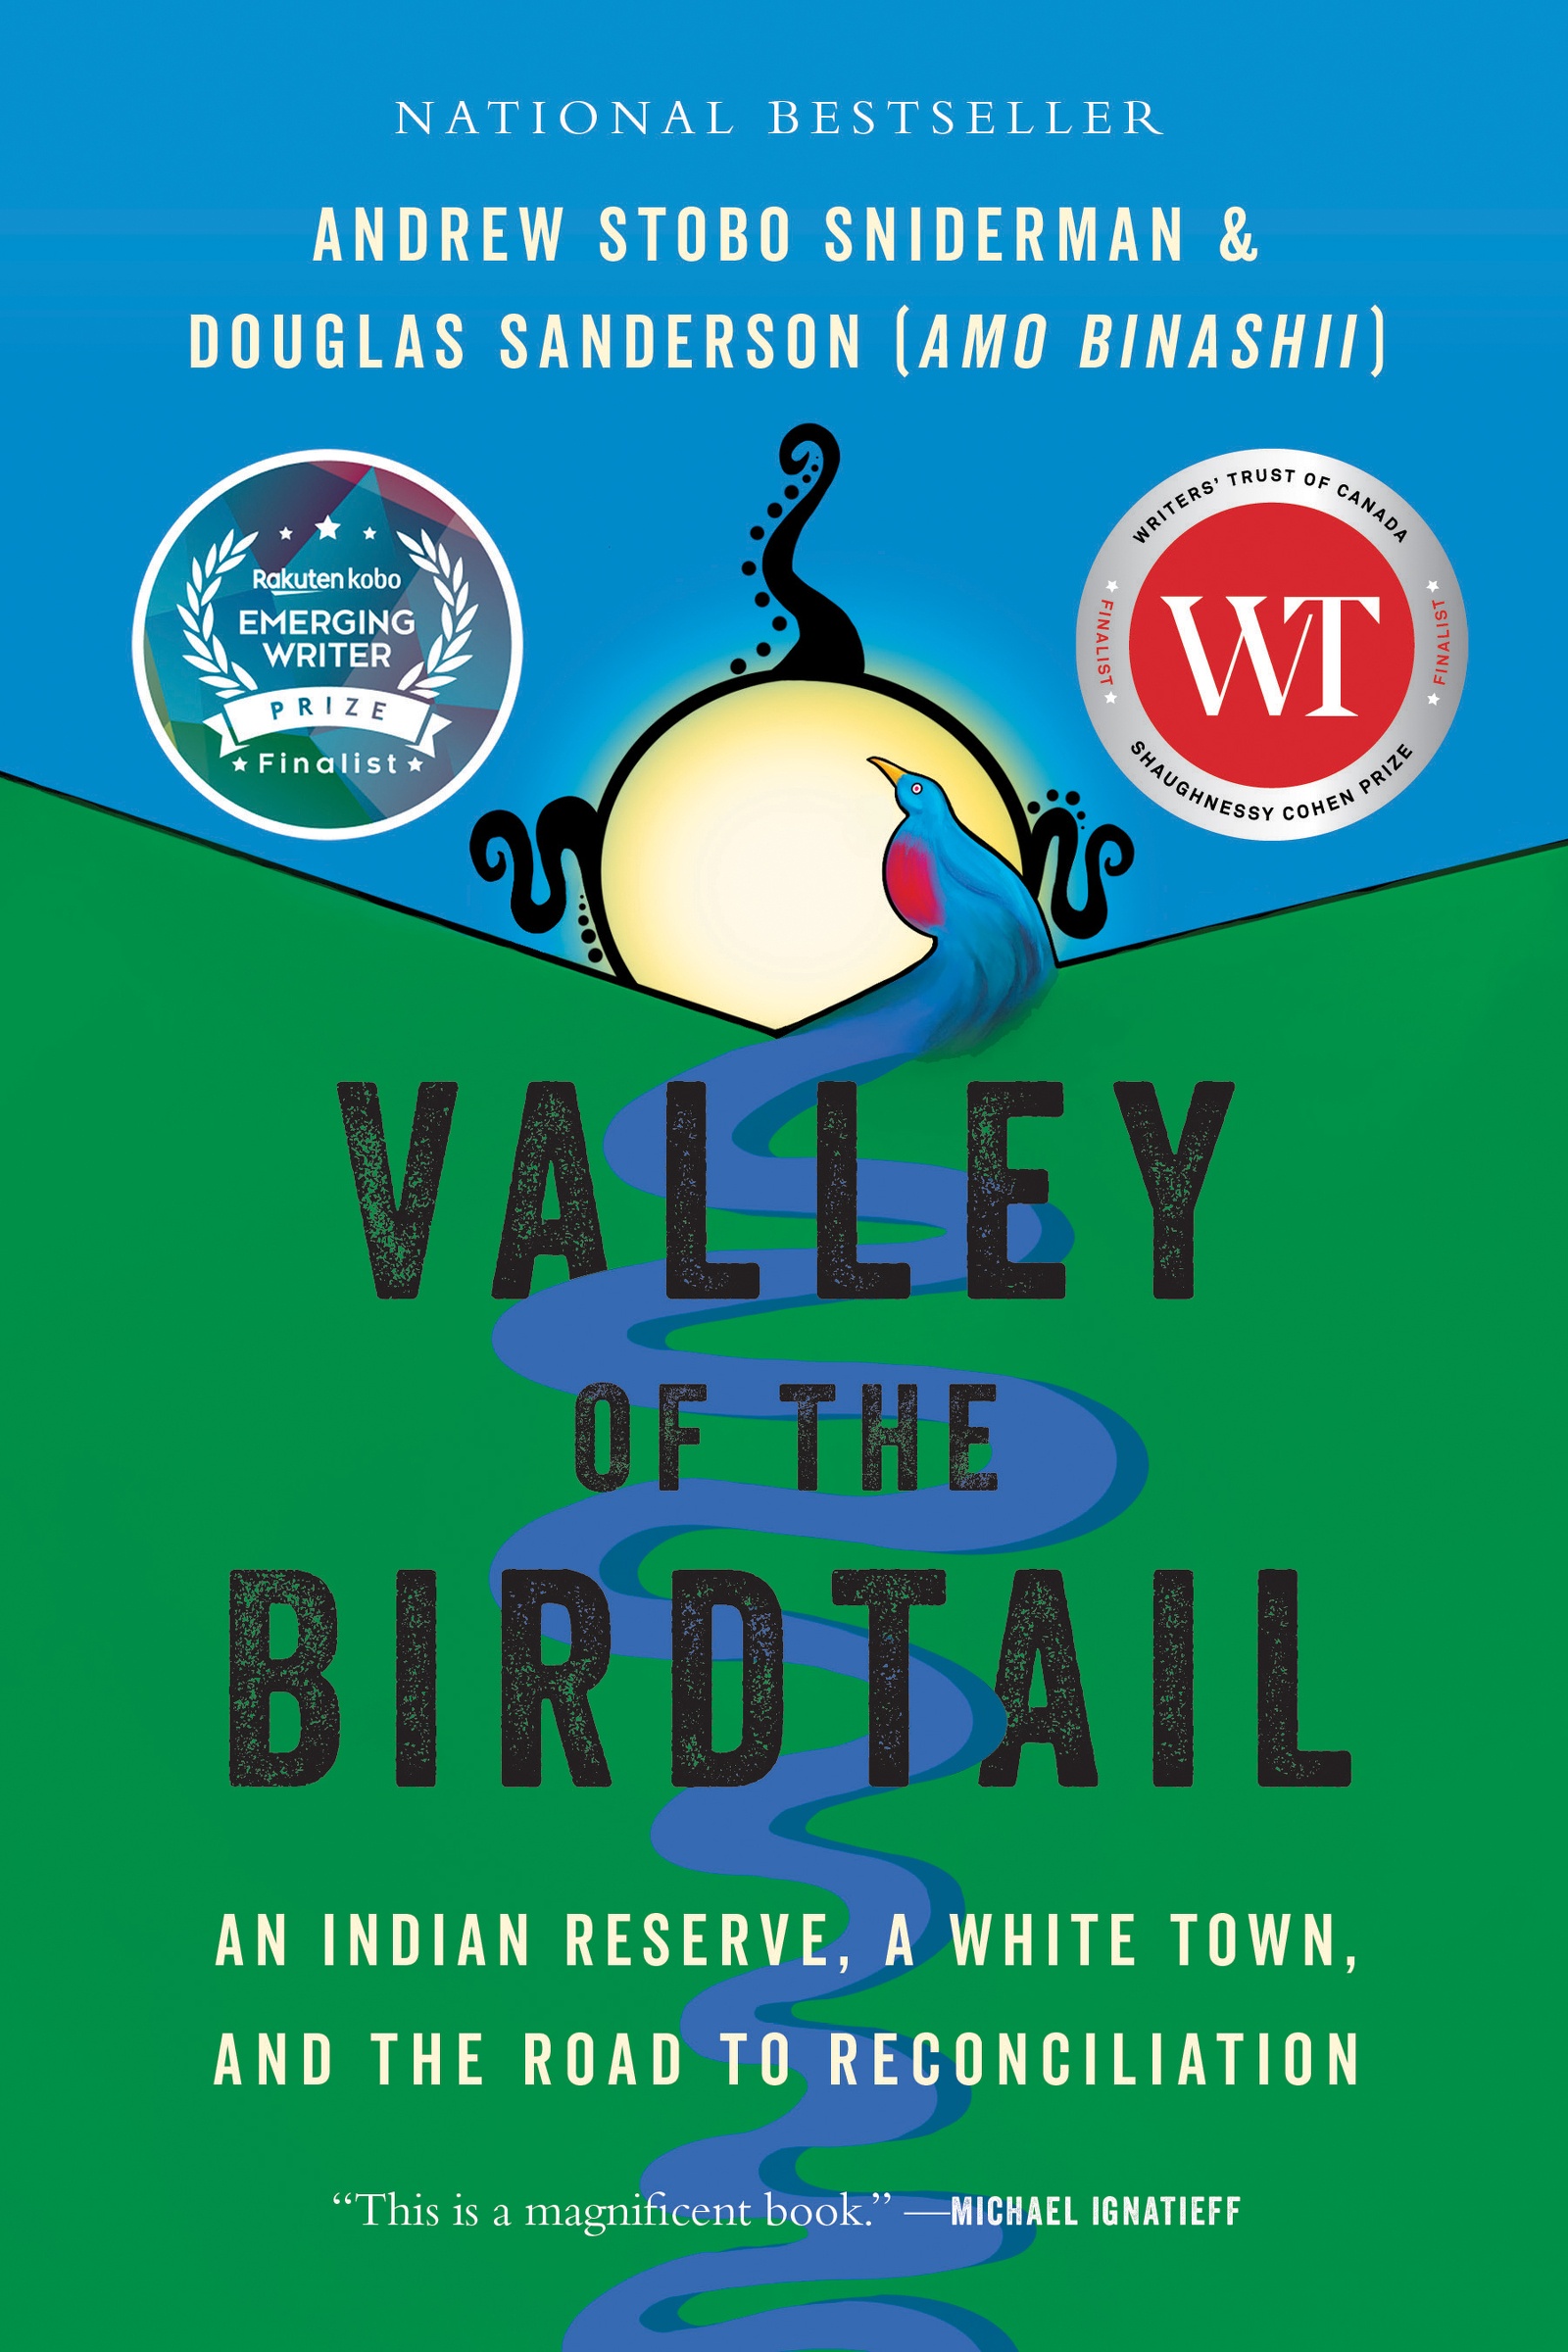 Valley of the Birdtail: An Indian Reserve, a White Town, and the Road to Reconciliation by Andrew Stobo Sniderman and Douglas Sanderson